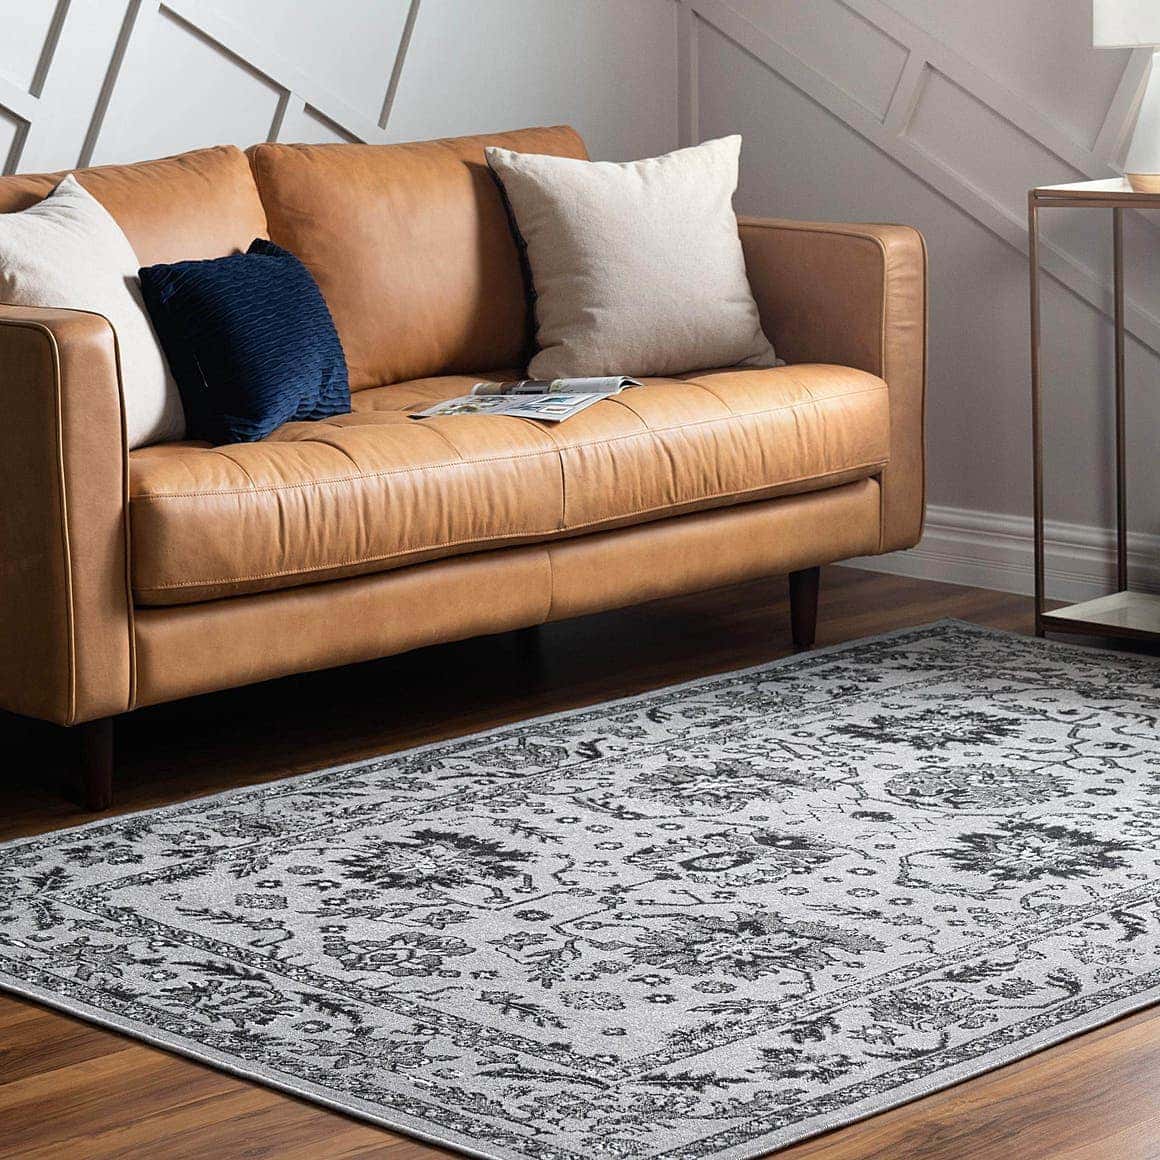 25 Gorgeous Rugs That Go With Brown Couches, Black And Beige Rug Living Room